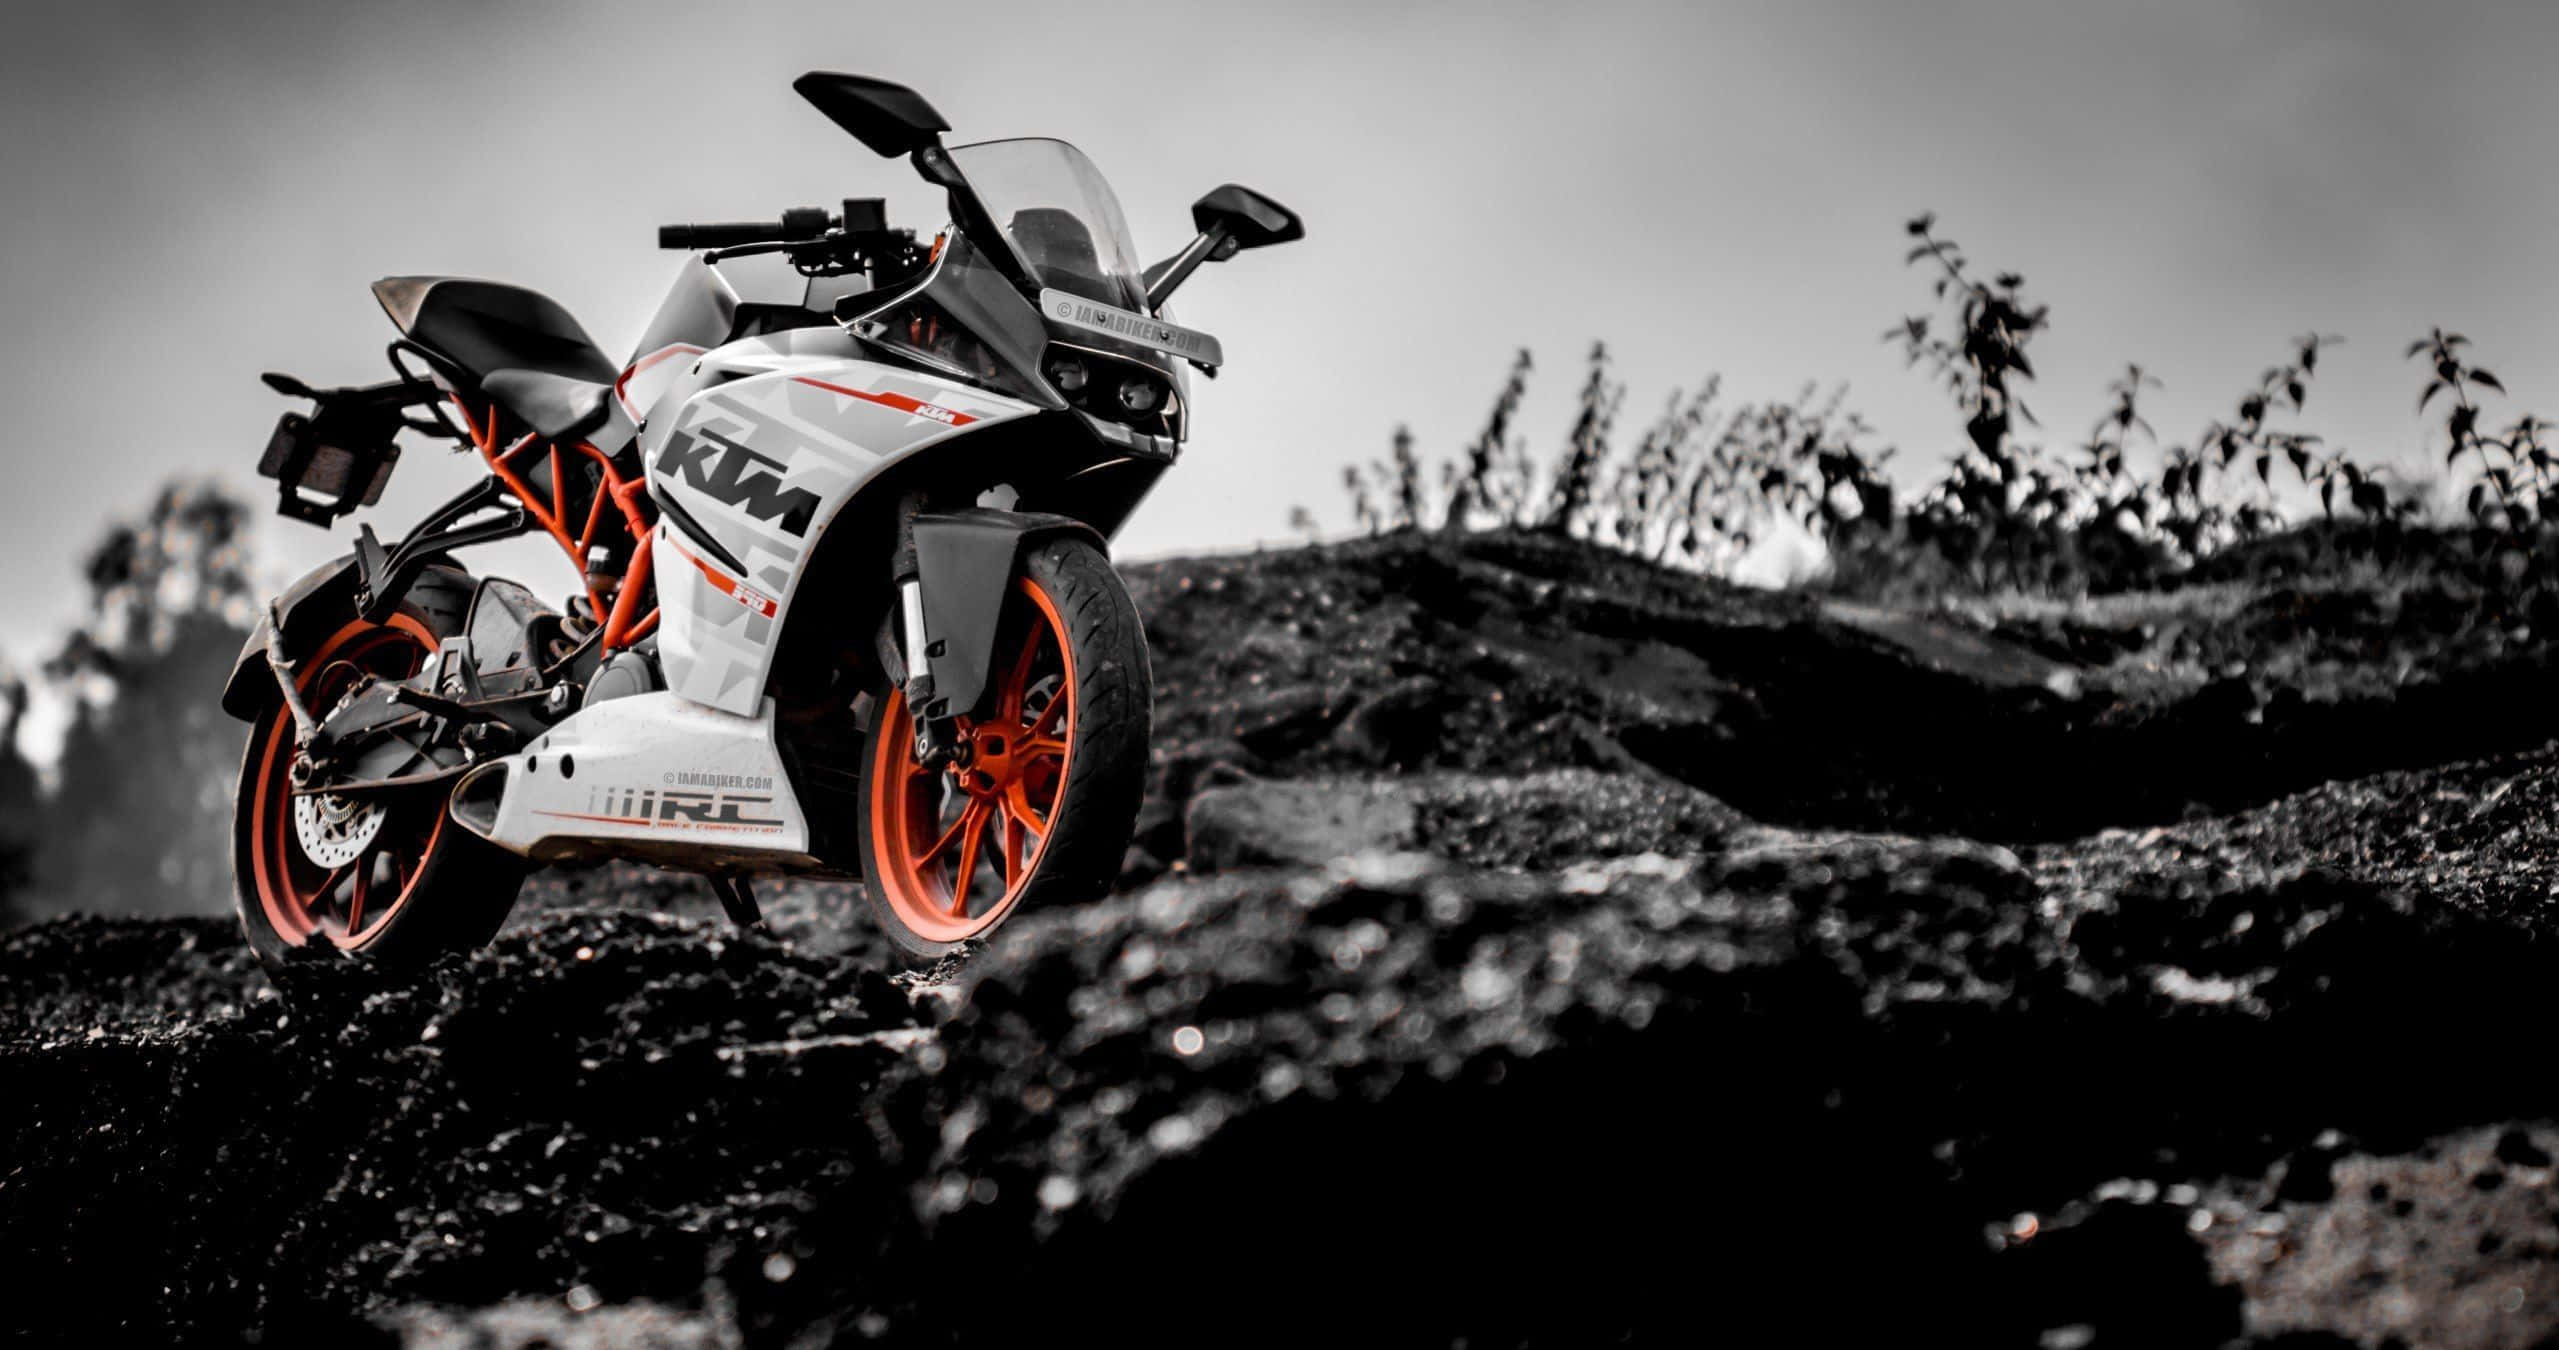 Conquer the streets with the KTM bike